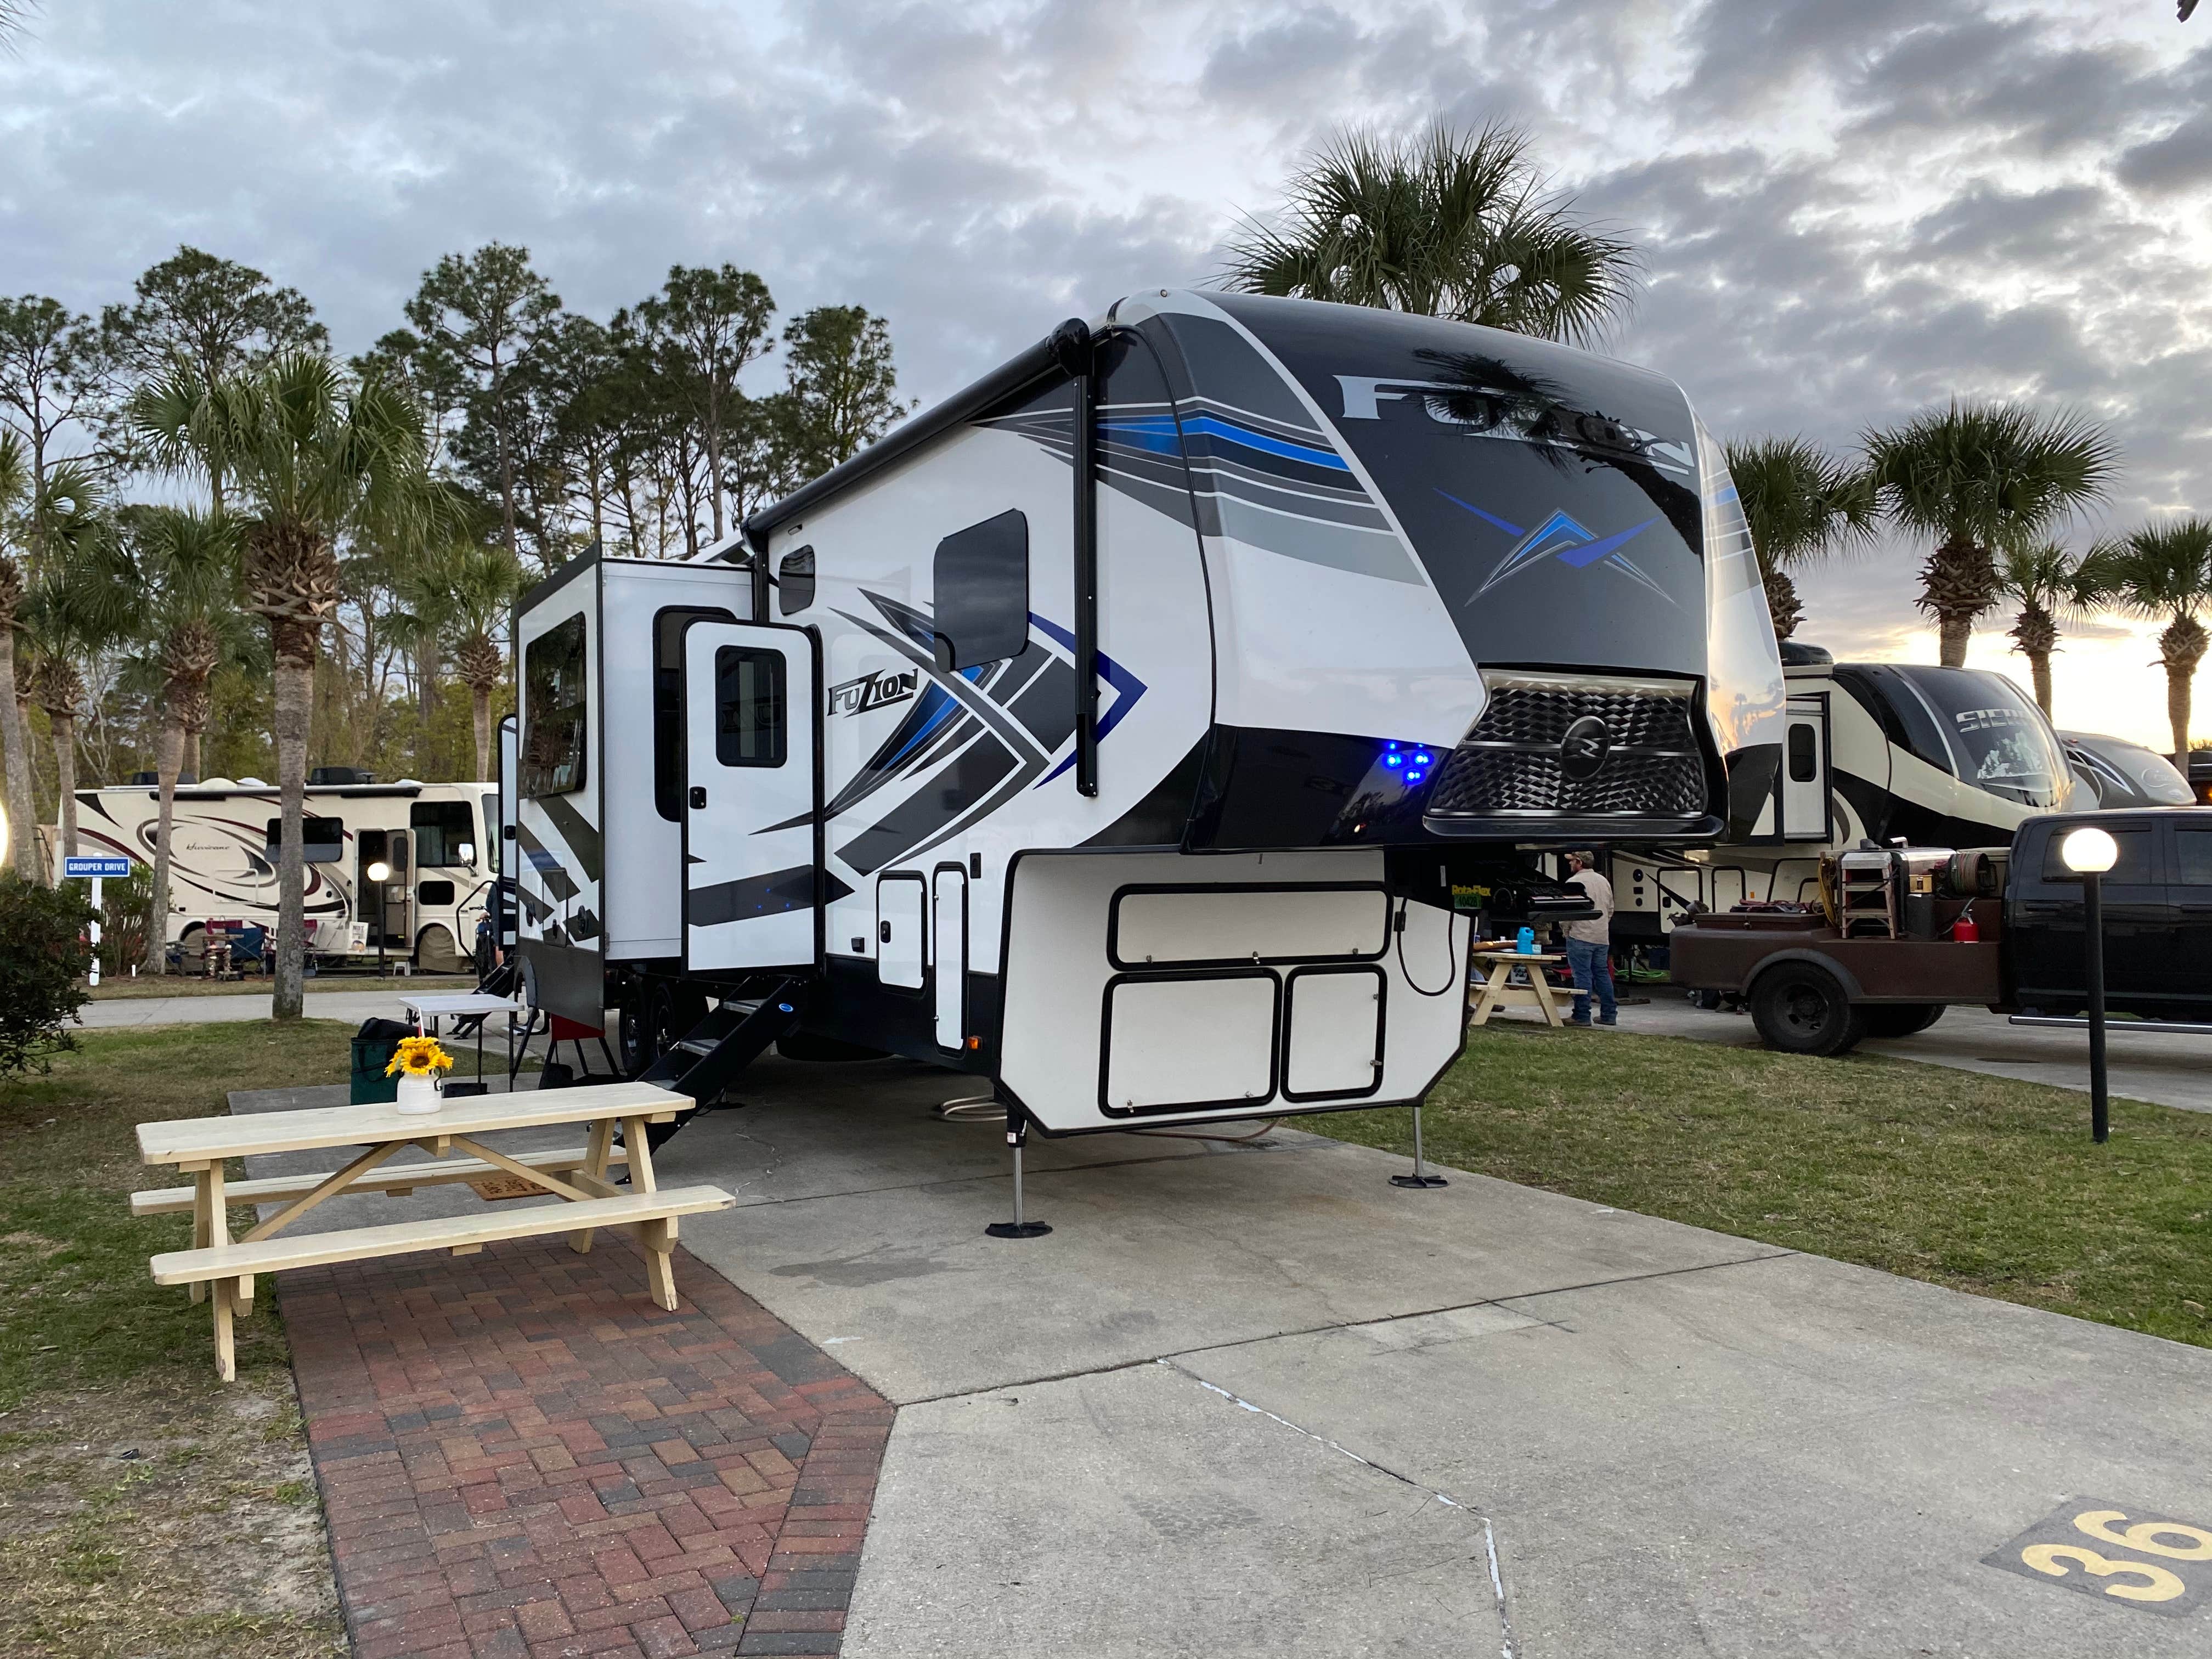 Camper submitted image from Emerald Coast RV Beach Resort - 2